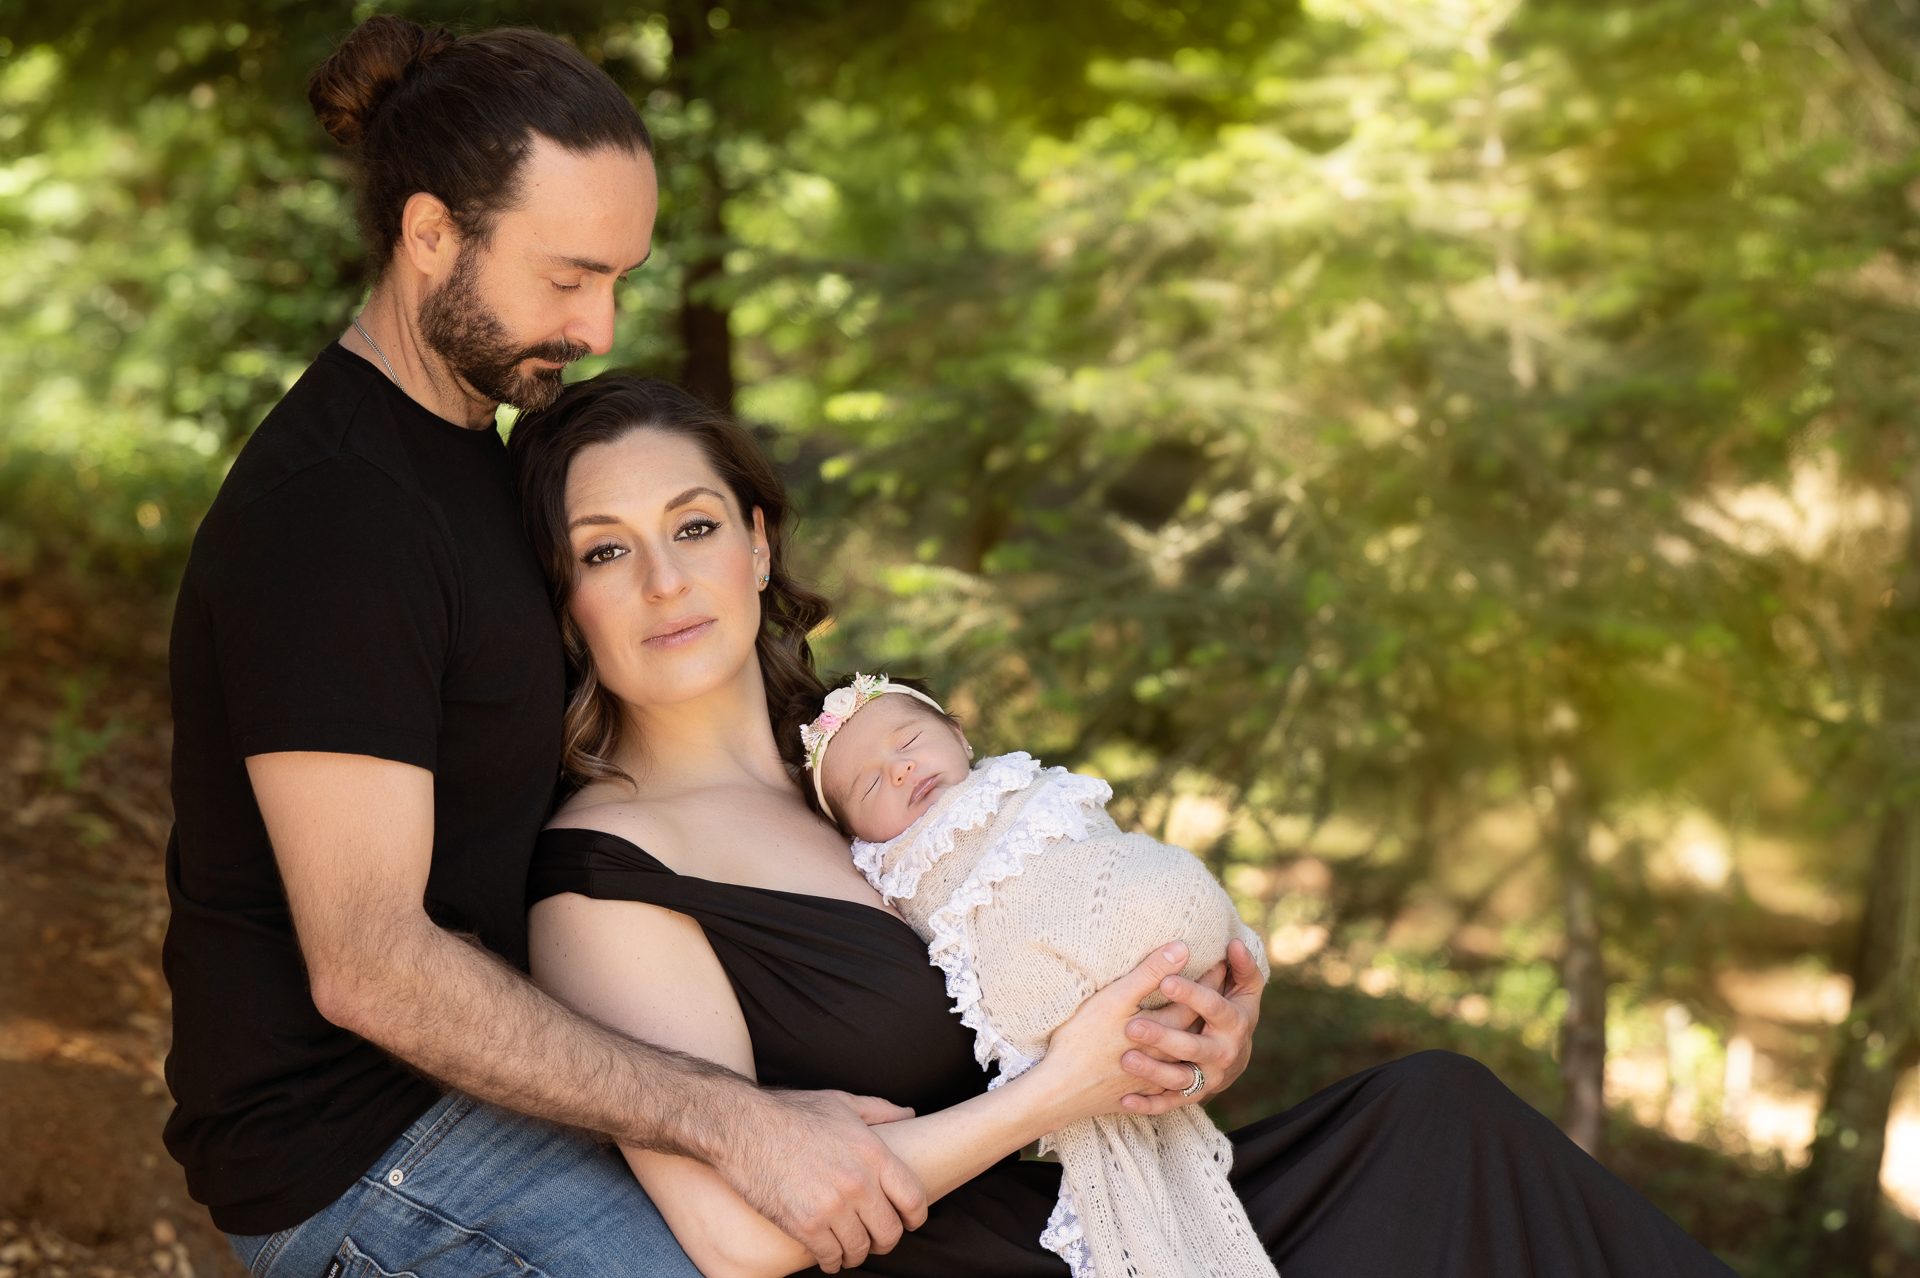 Couple wearing black outfits posing outdoors with their newborn daughter. Baby wear light color wrap and headband.